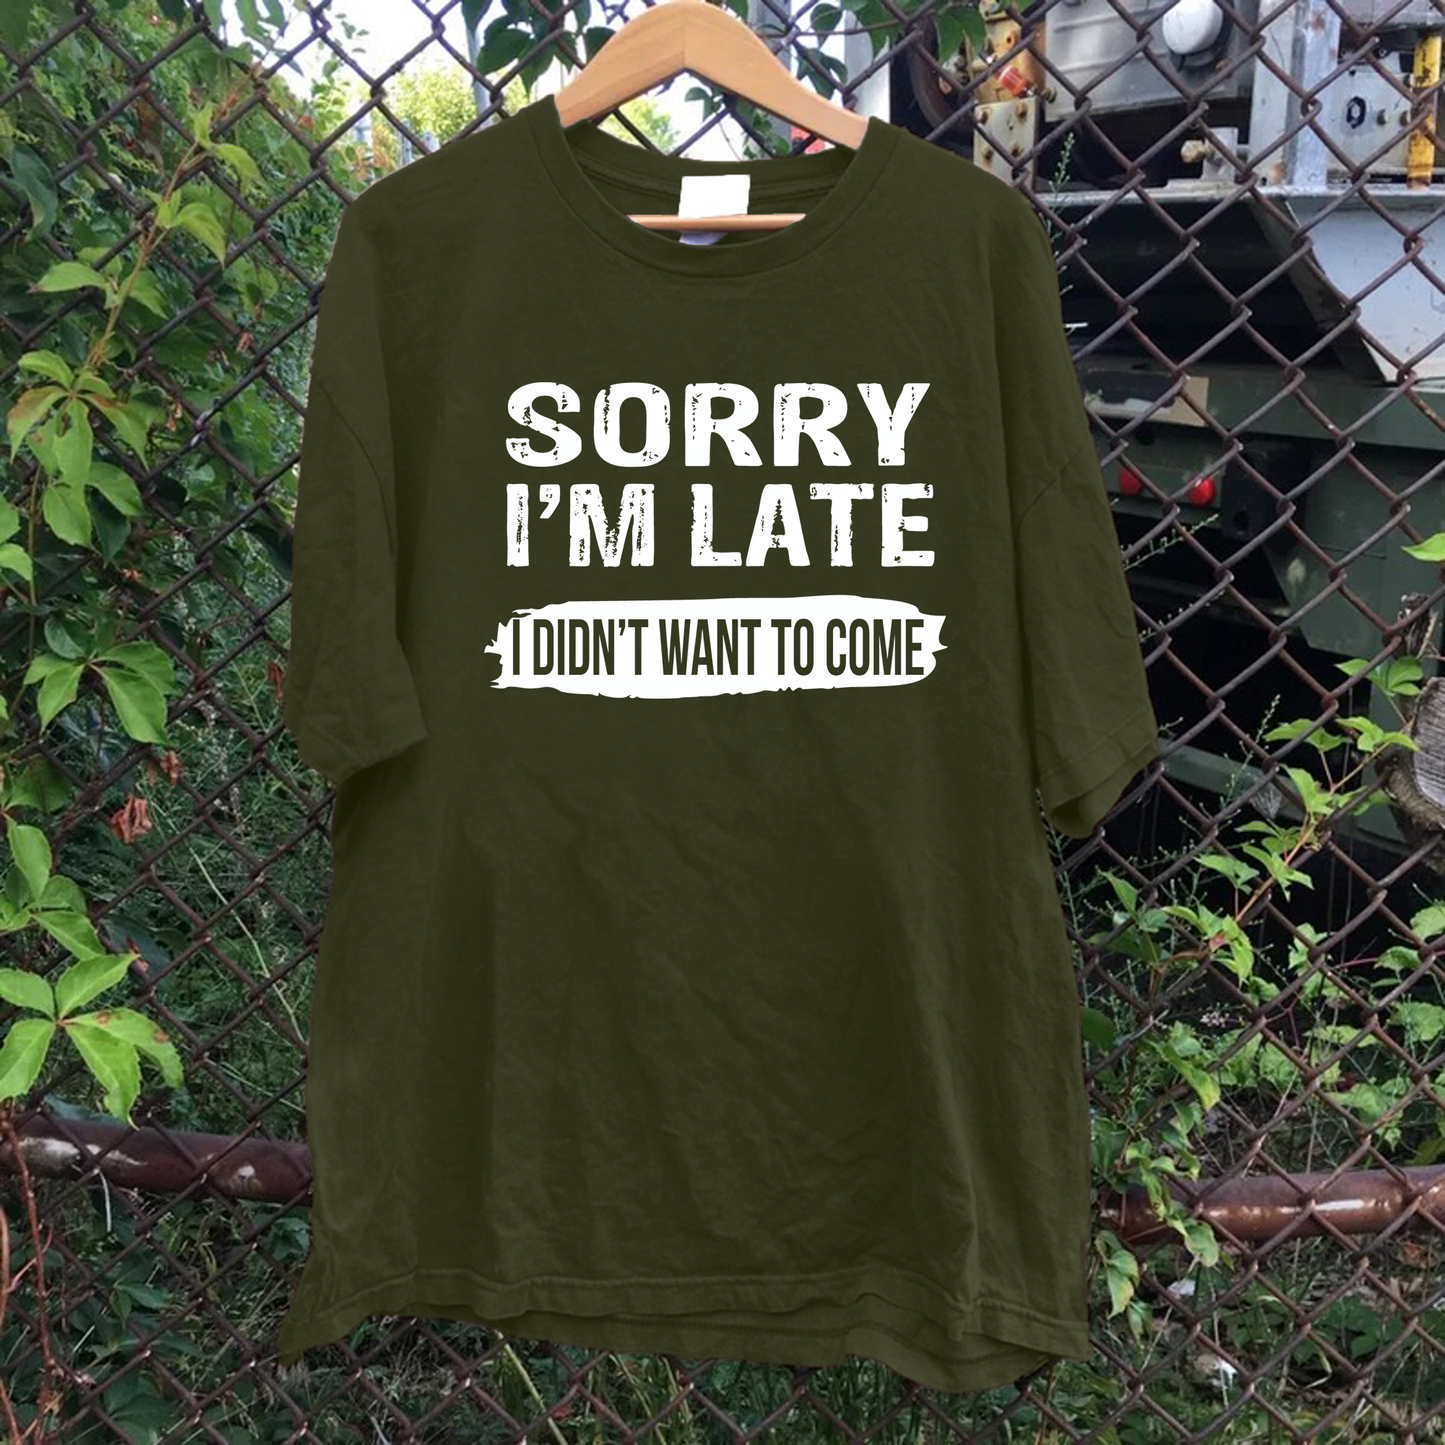 Sorry Im Late I Didn't Want To Come Tee